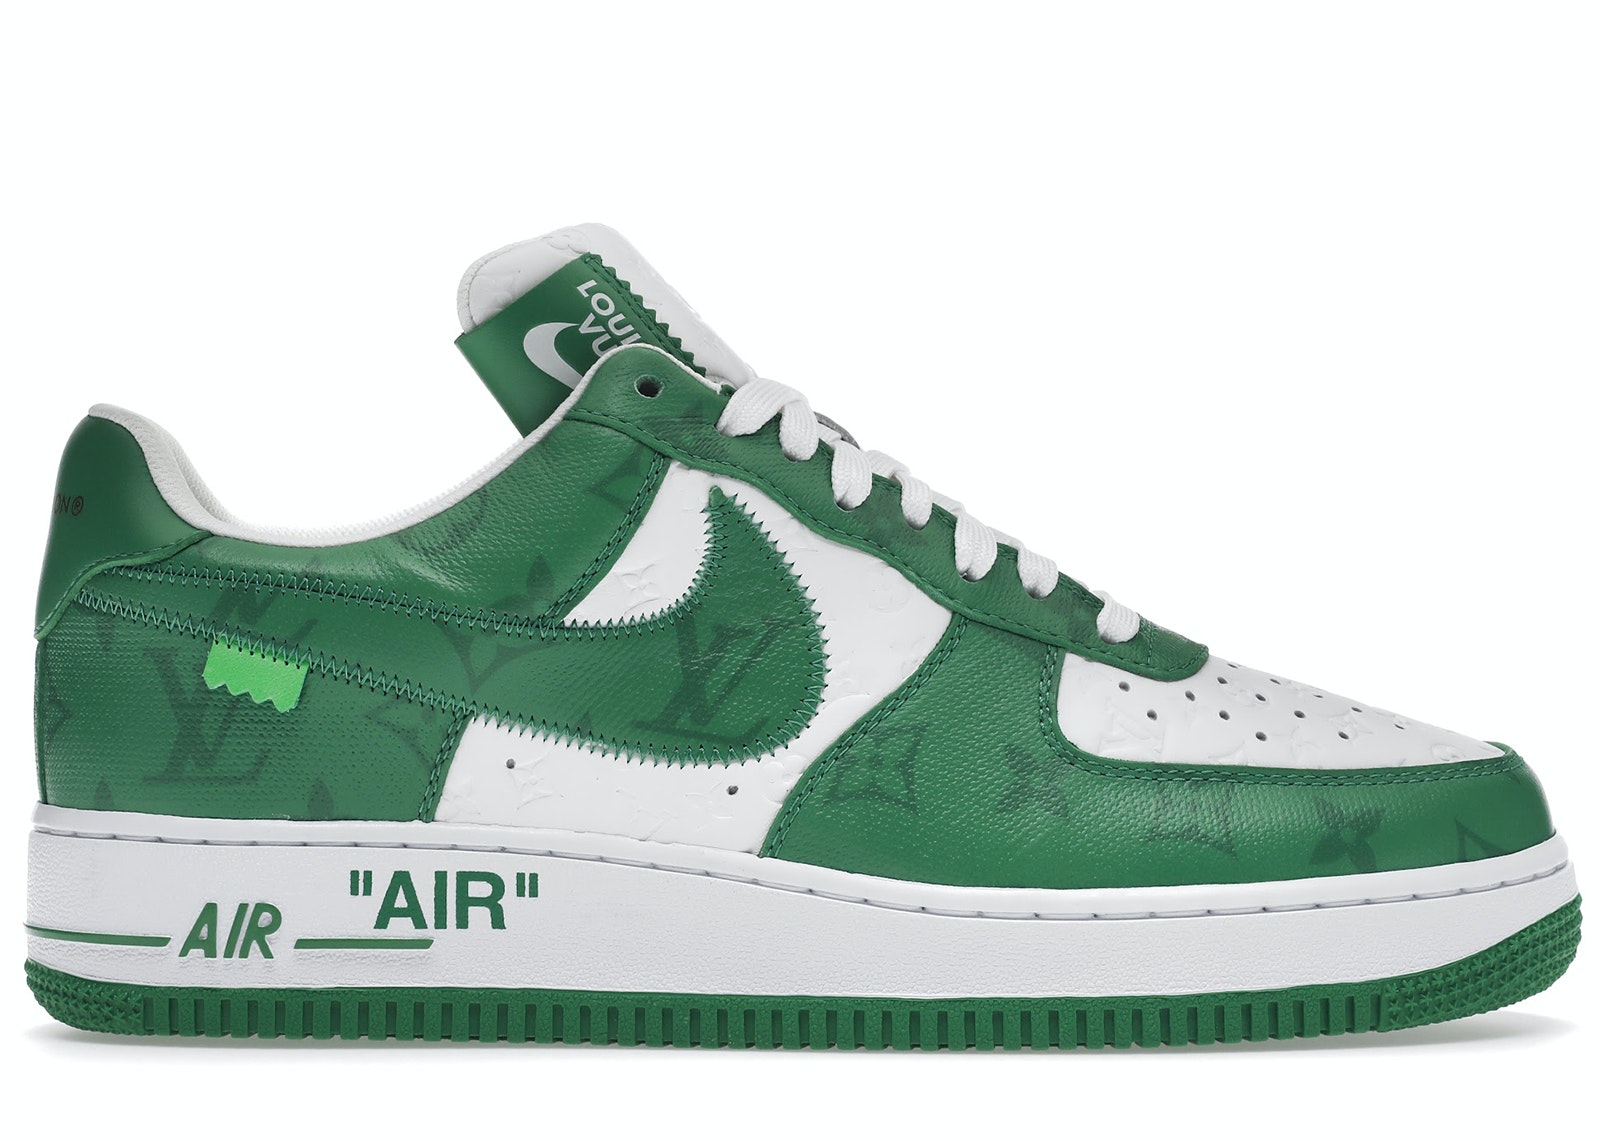 Nike Louis Vuitton Louis Vuitton X Nike Air Force 1 Chrome Toe  Size 95  Available For Immediate Sale At Sothebys